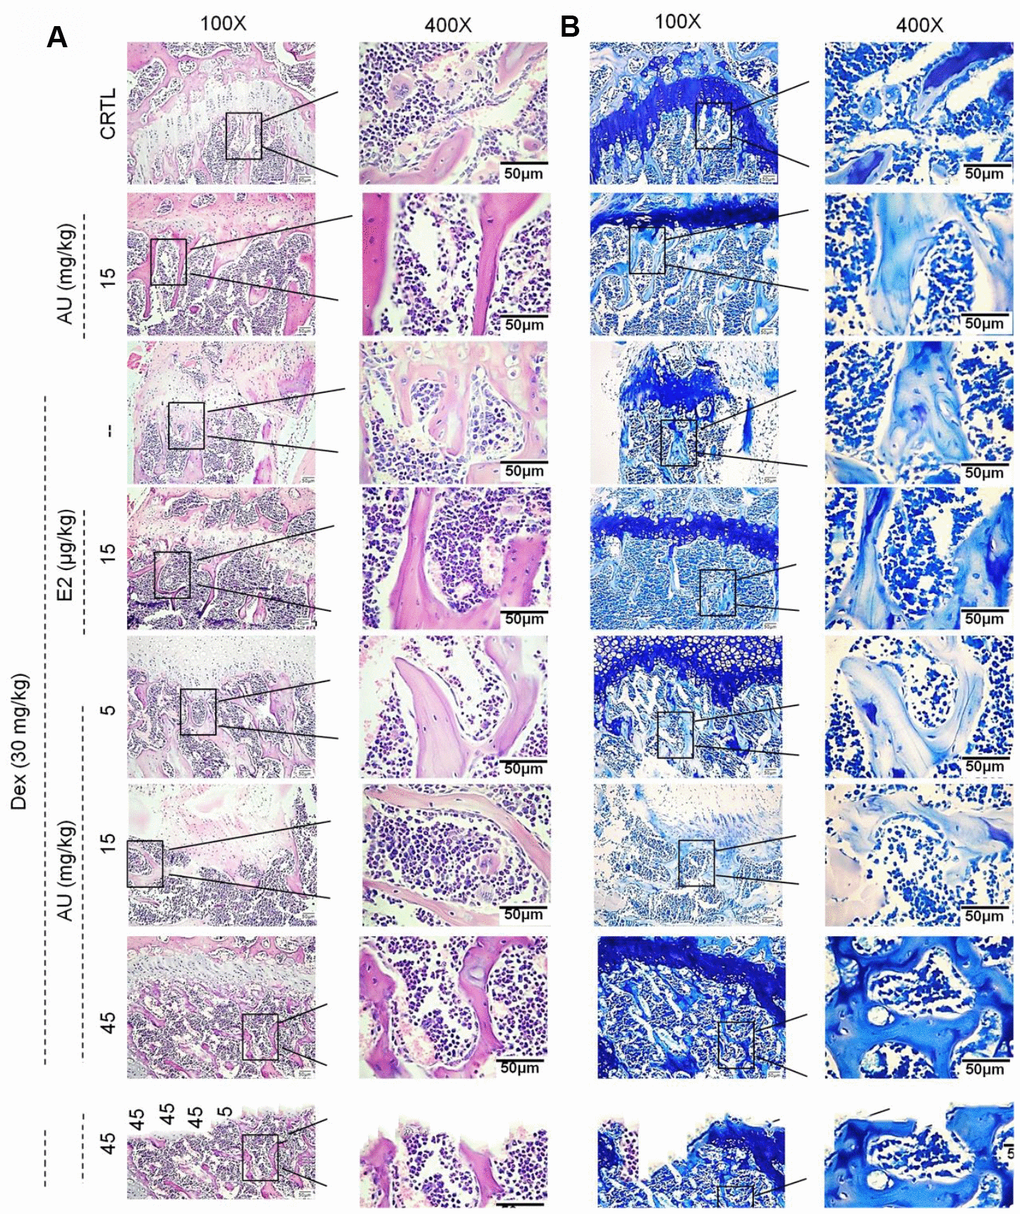 The effects of AU on the femoral histological changes of osteoporotic mice were detected by (A) H&E staining and (B) Giemsa staining (n=6).